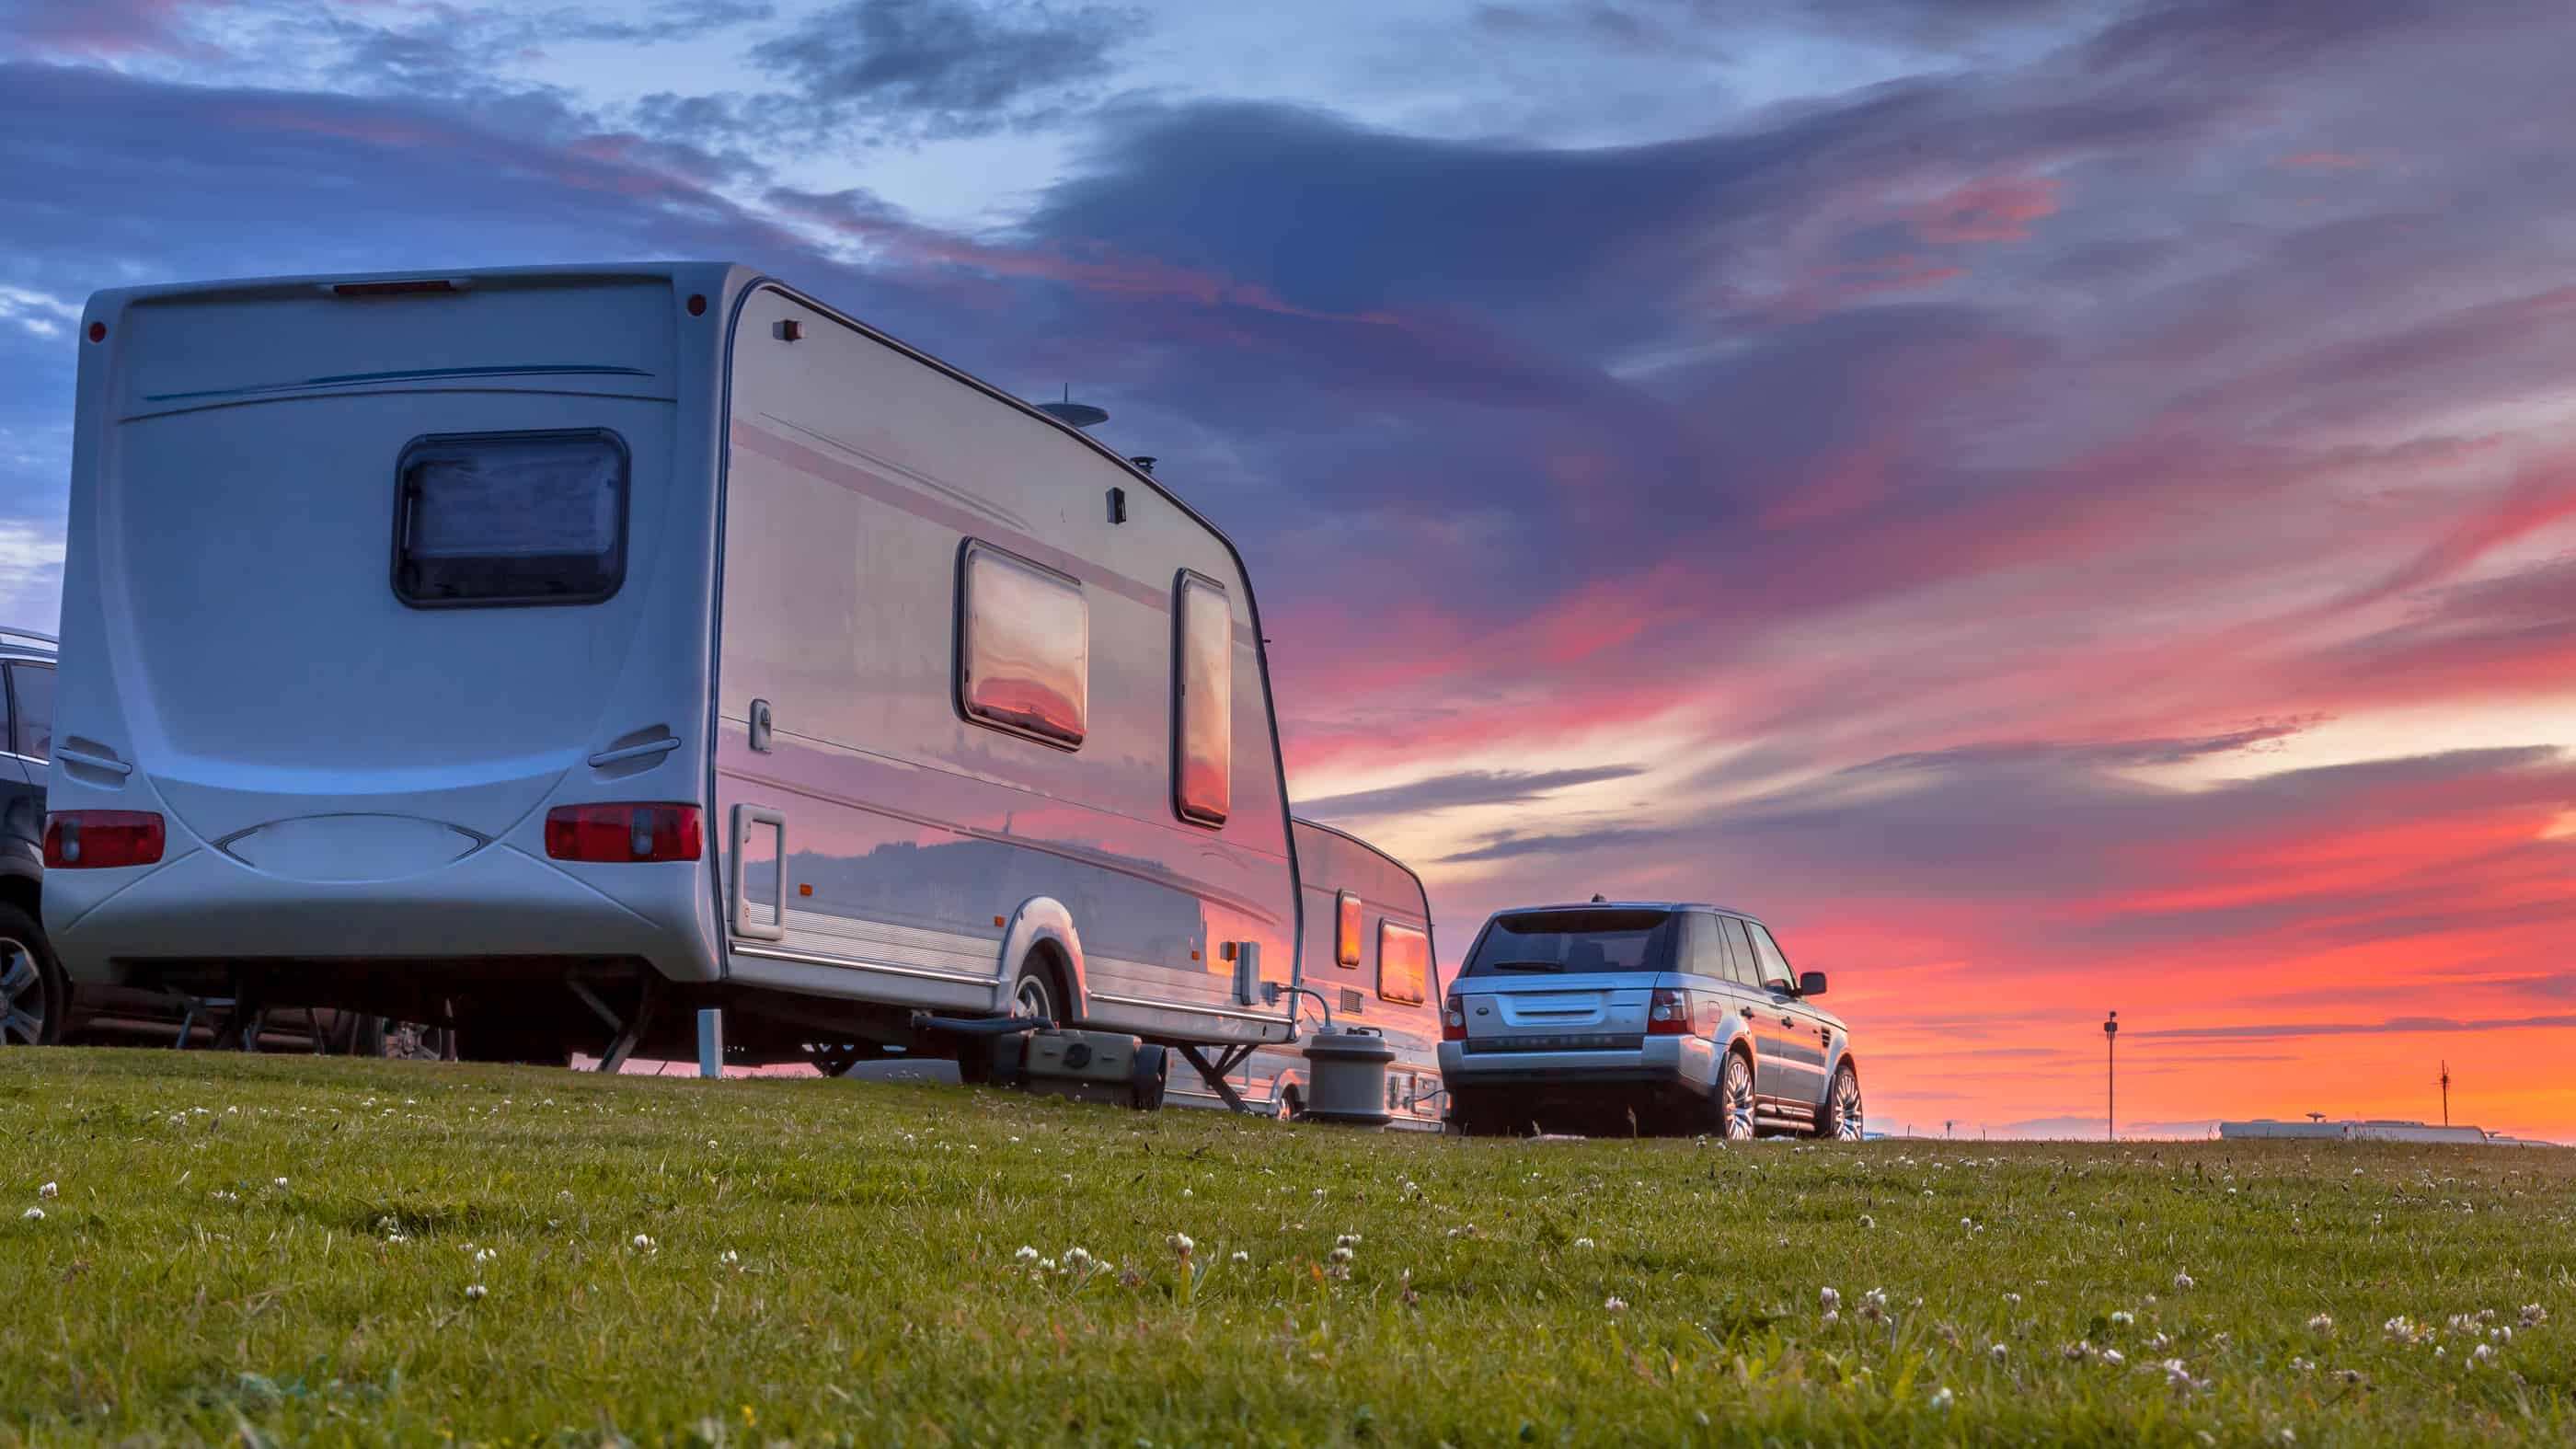 Camping Caravans And Cars Parked On A Grassy Campground Under Be